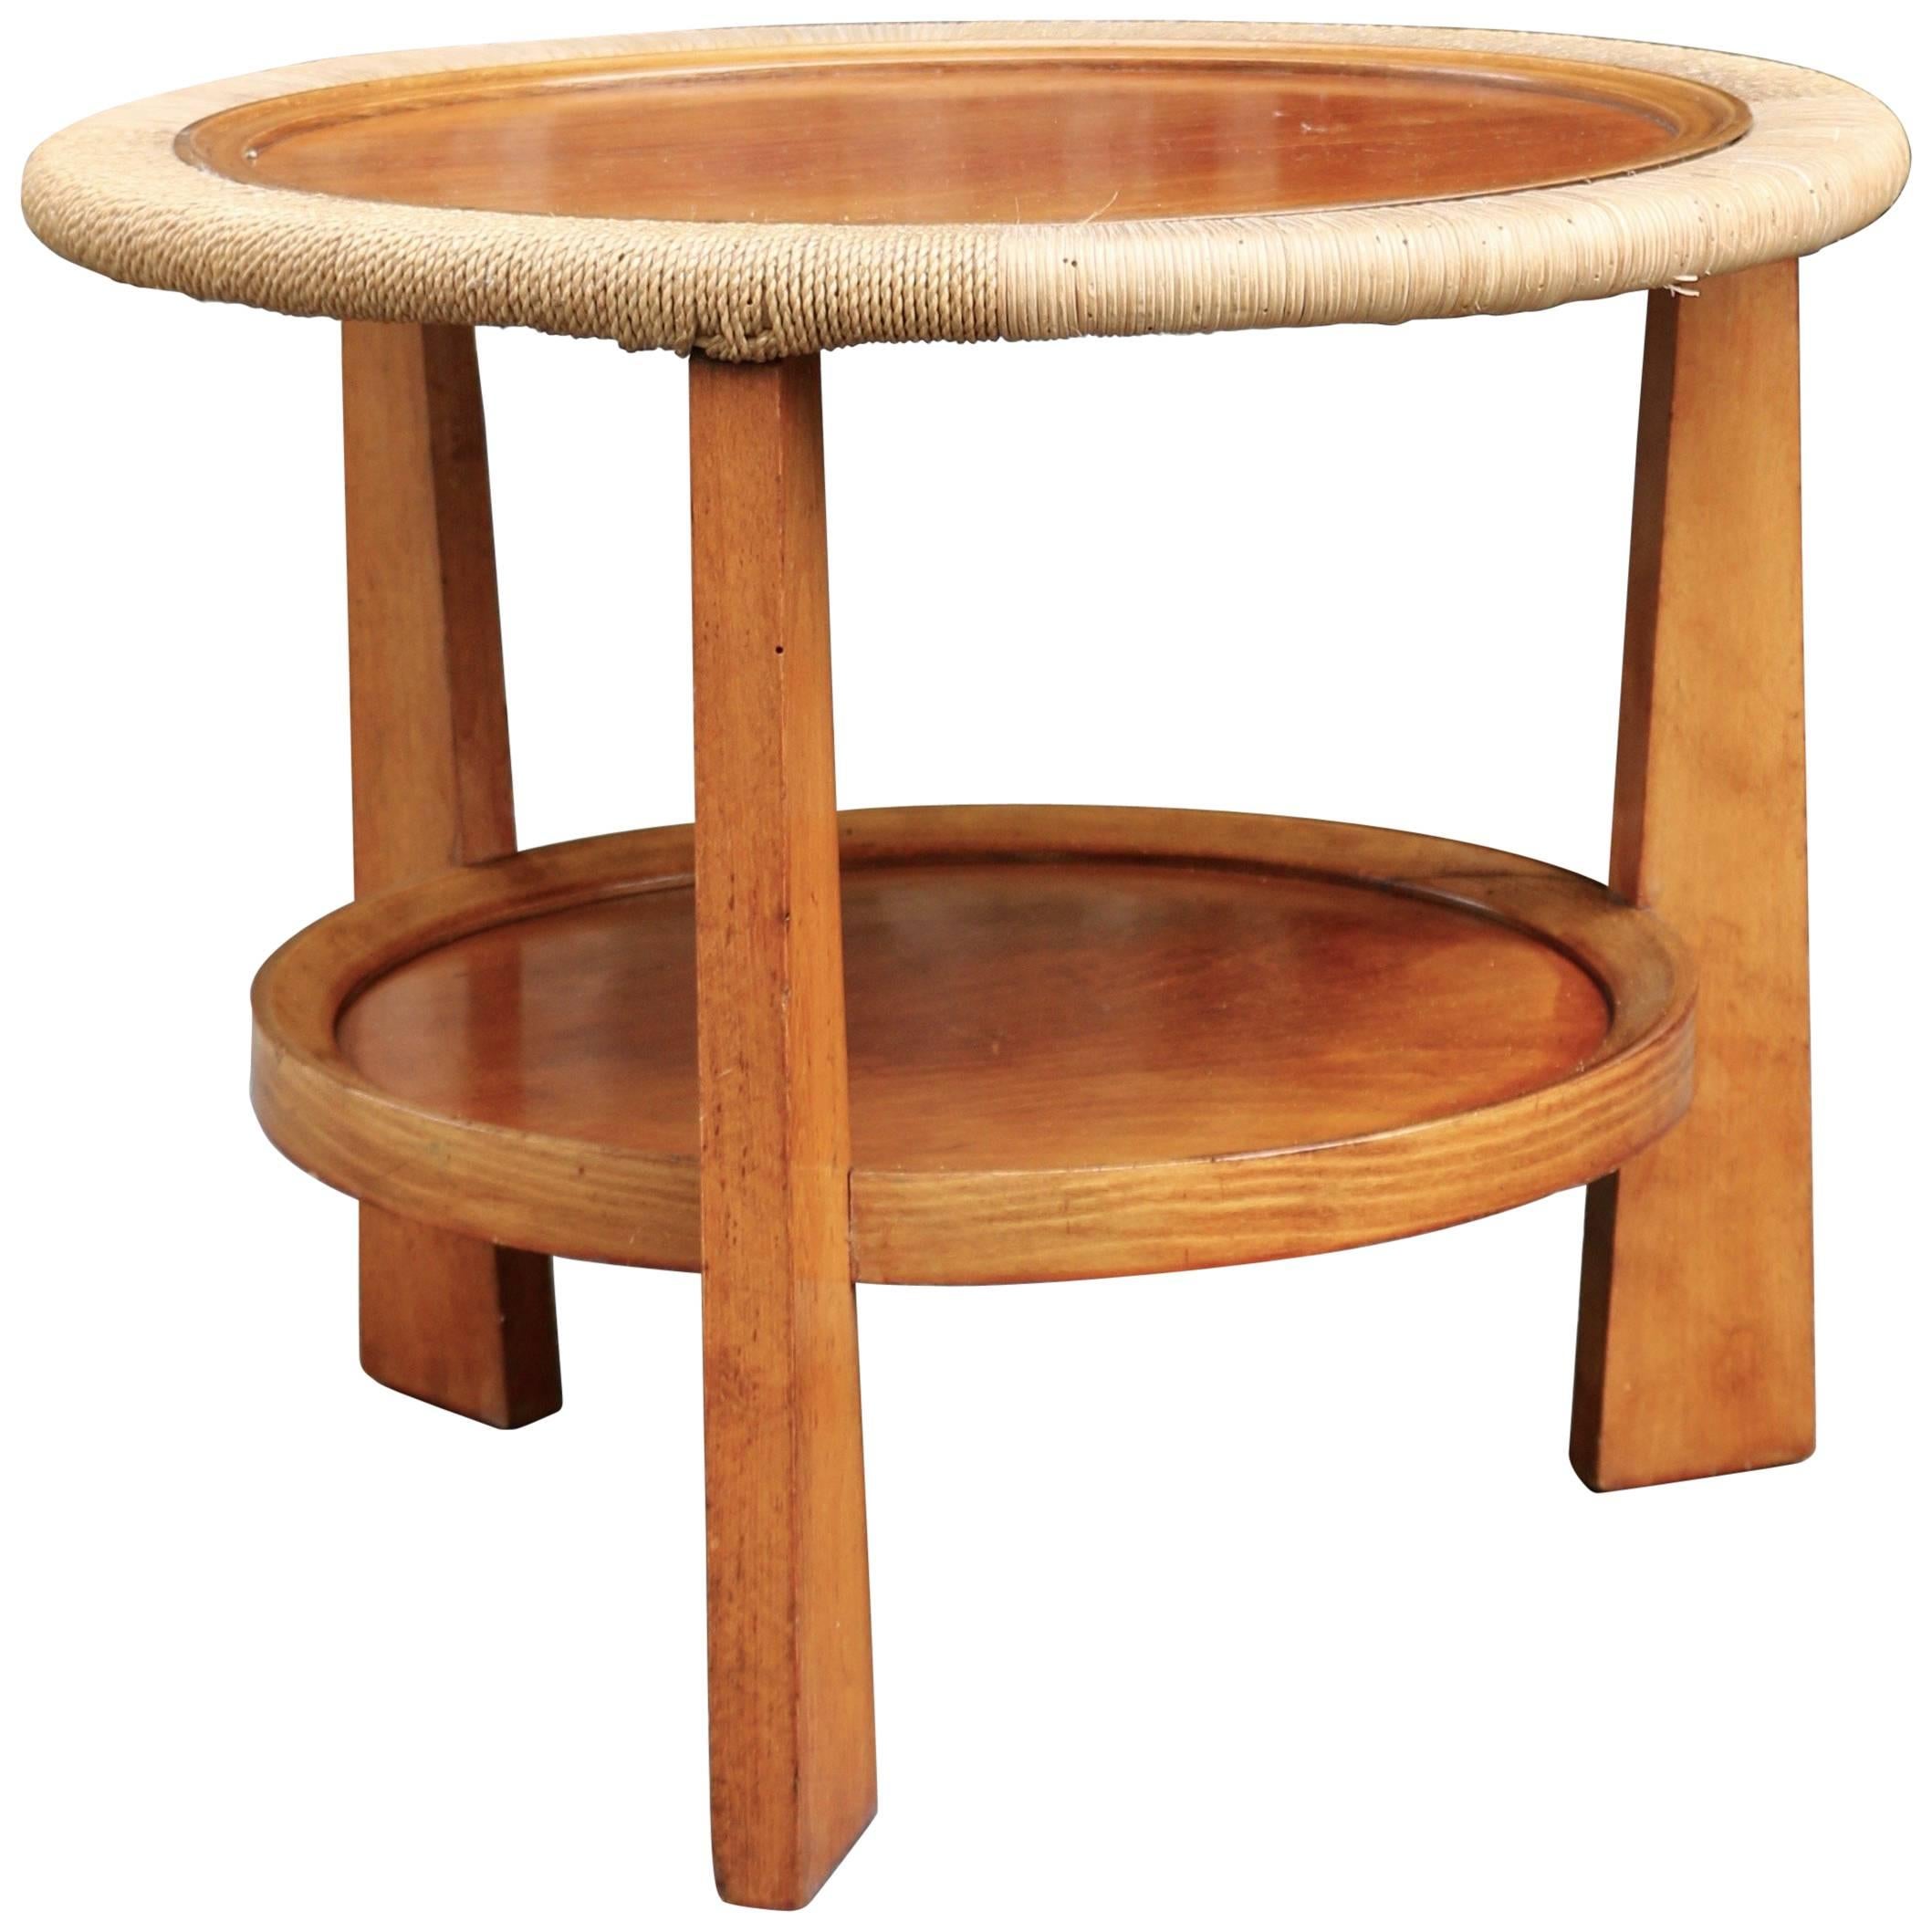 1950s Pedestal Table in Wood and Rope